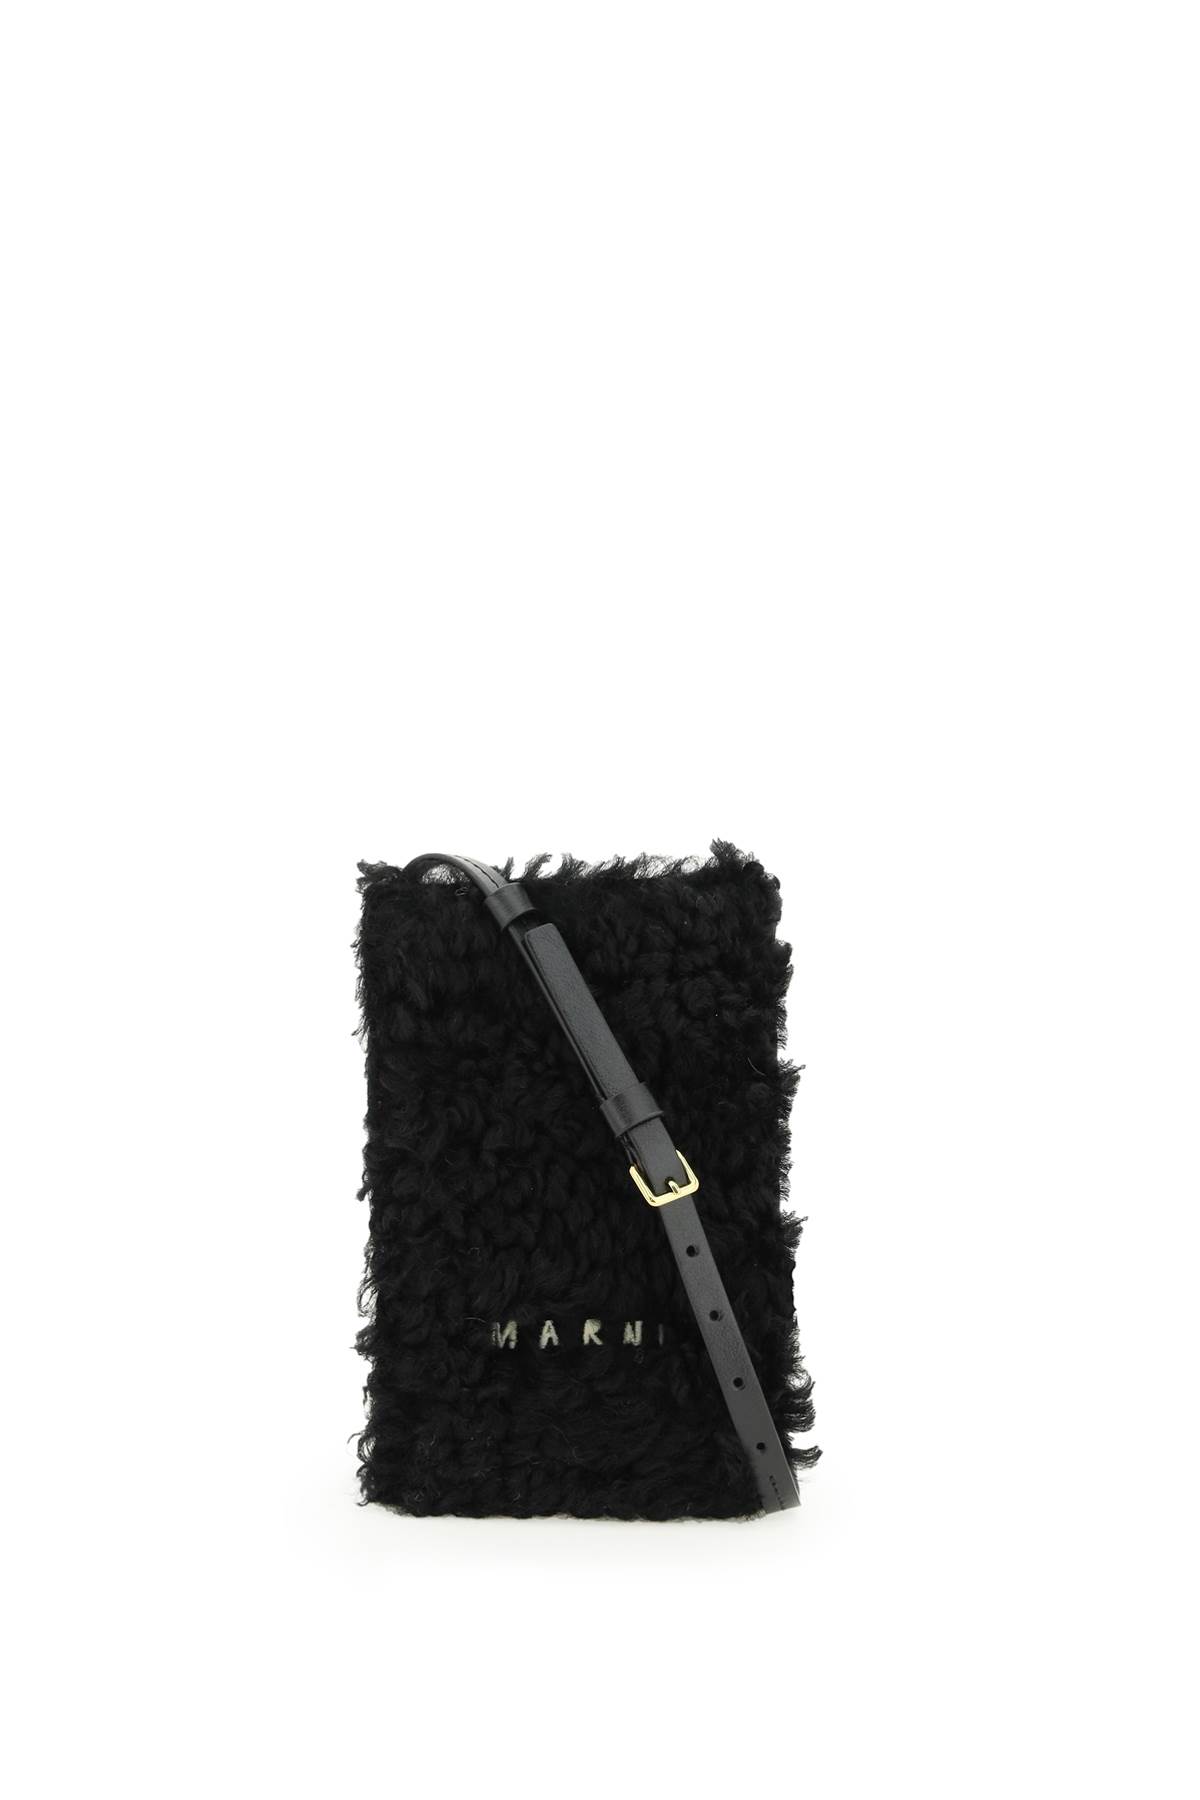 Marni Shearling Phone Holder With Strap